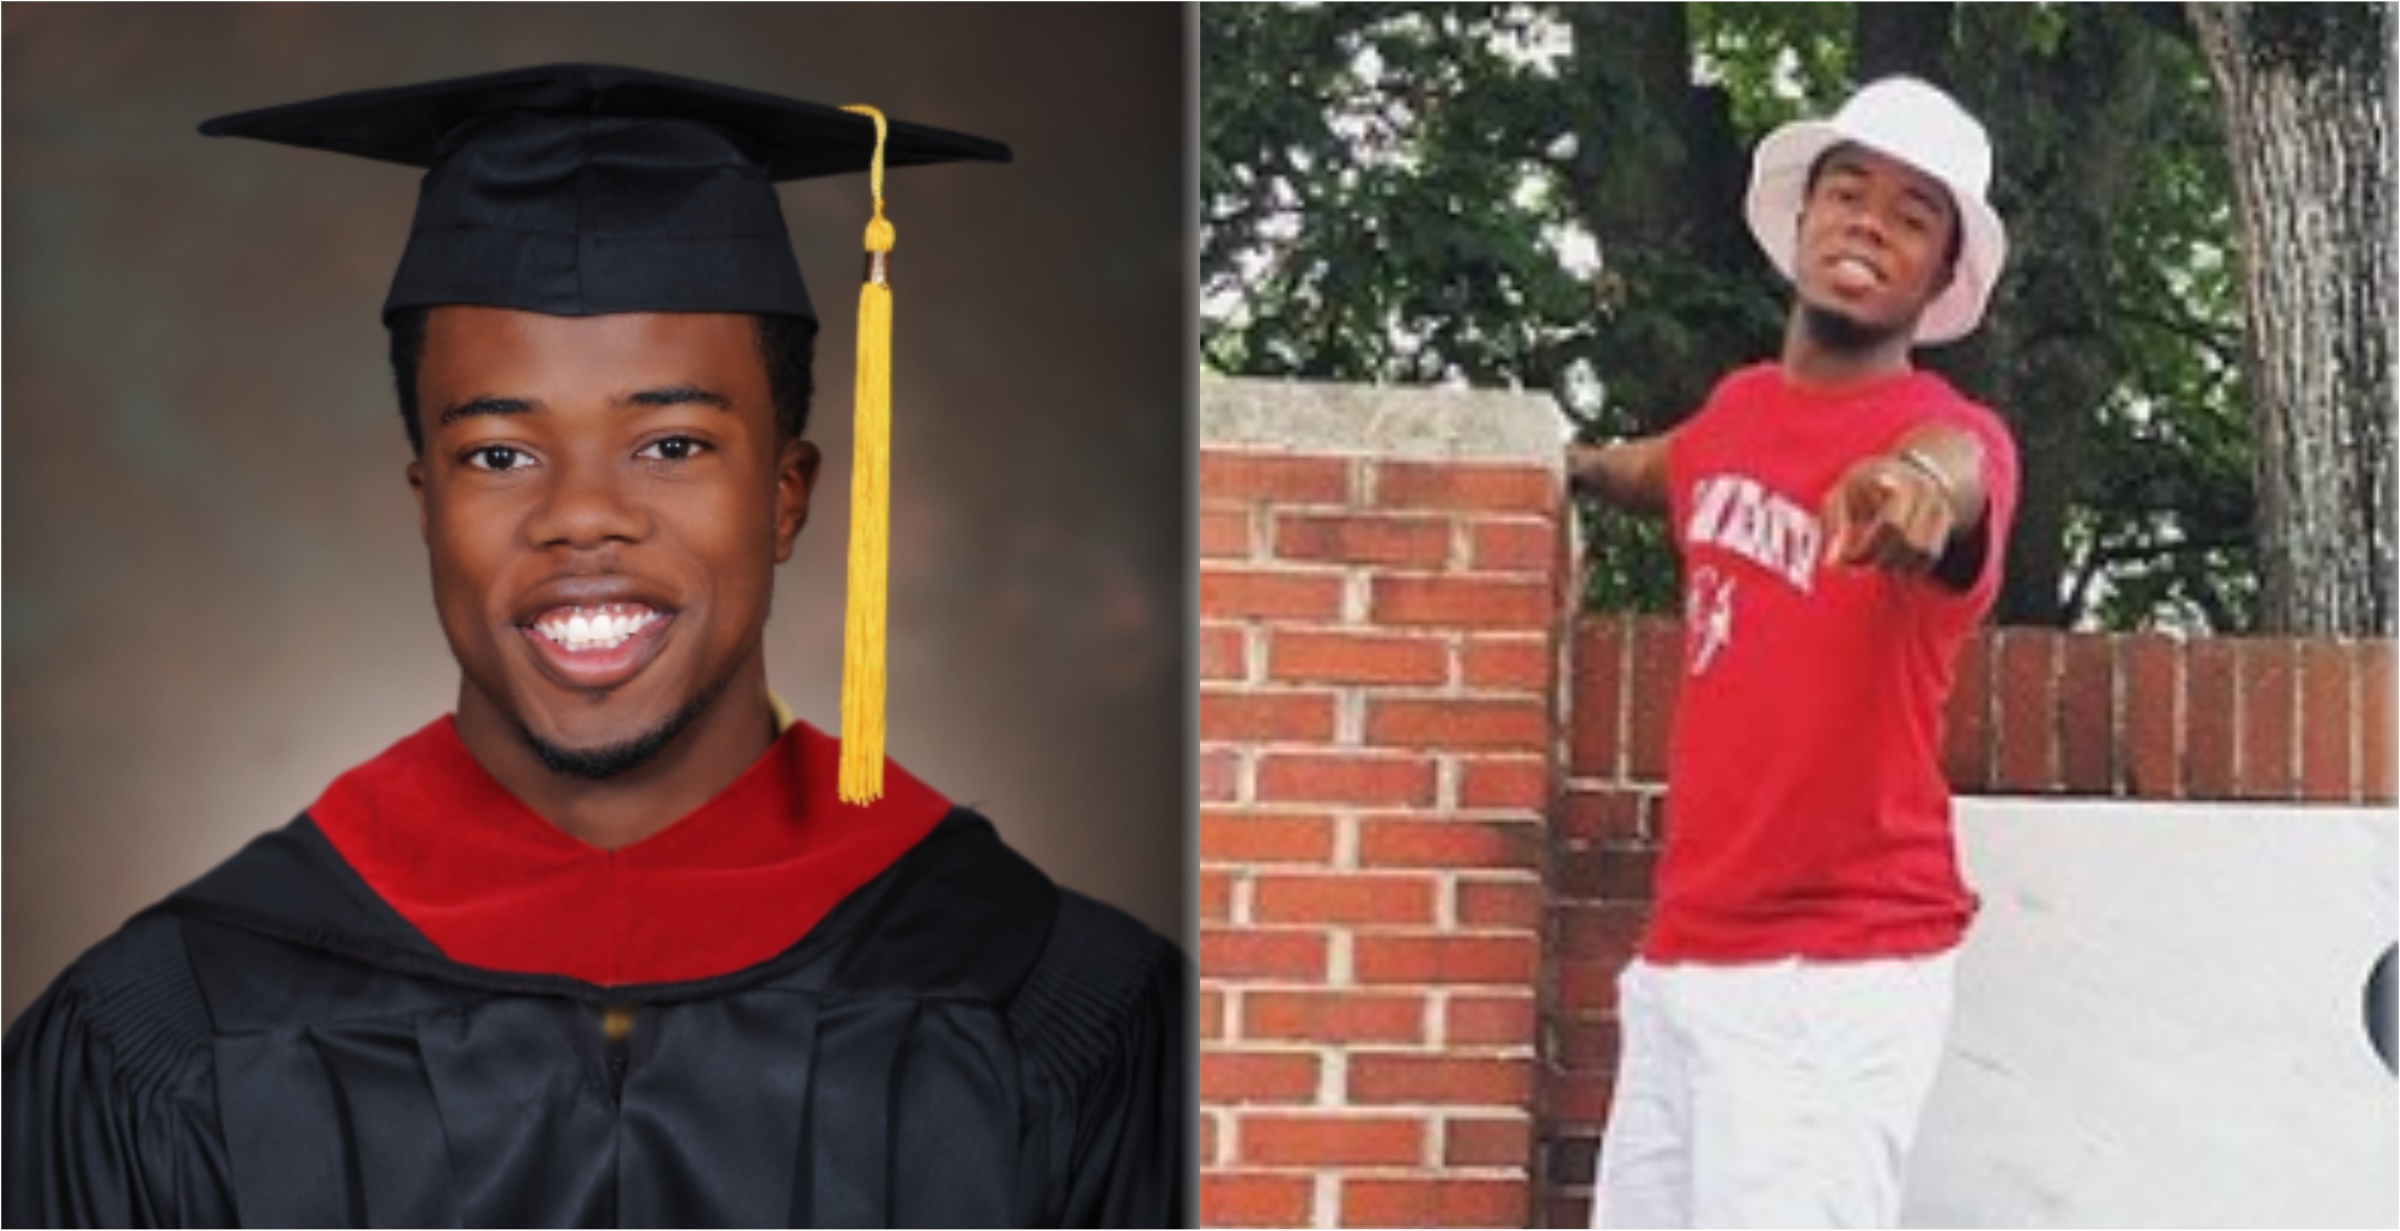 Meet the 19-year-old Black student graduates from university 2 years early with honours